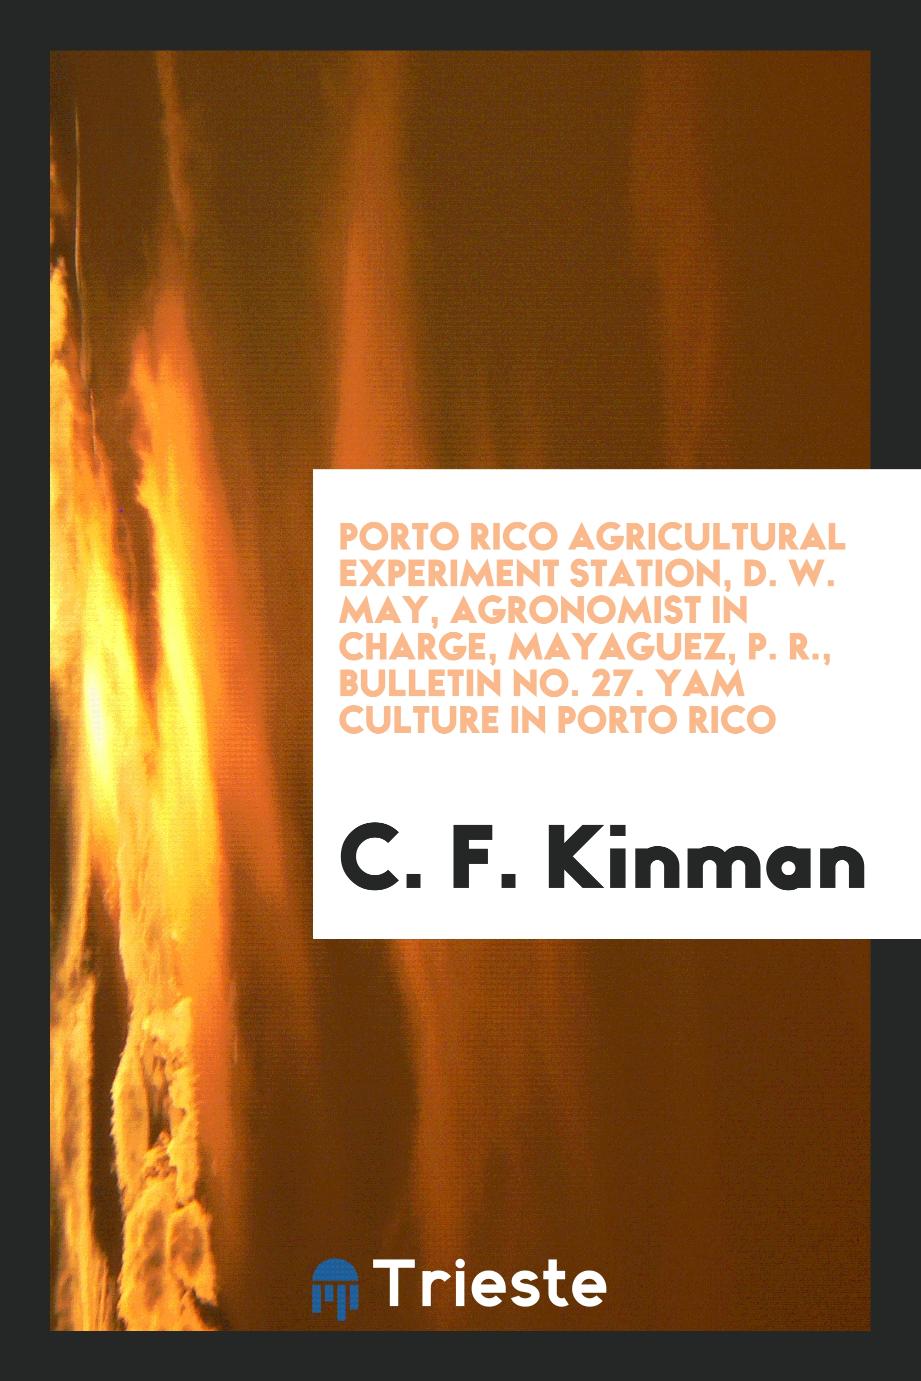 Porto Rico agricultural experiment station, D. W. May, agronomist in Charge, Mayaguez, P. R., Bulletin No. 27. YAM CULTURE IN PORTO RICO